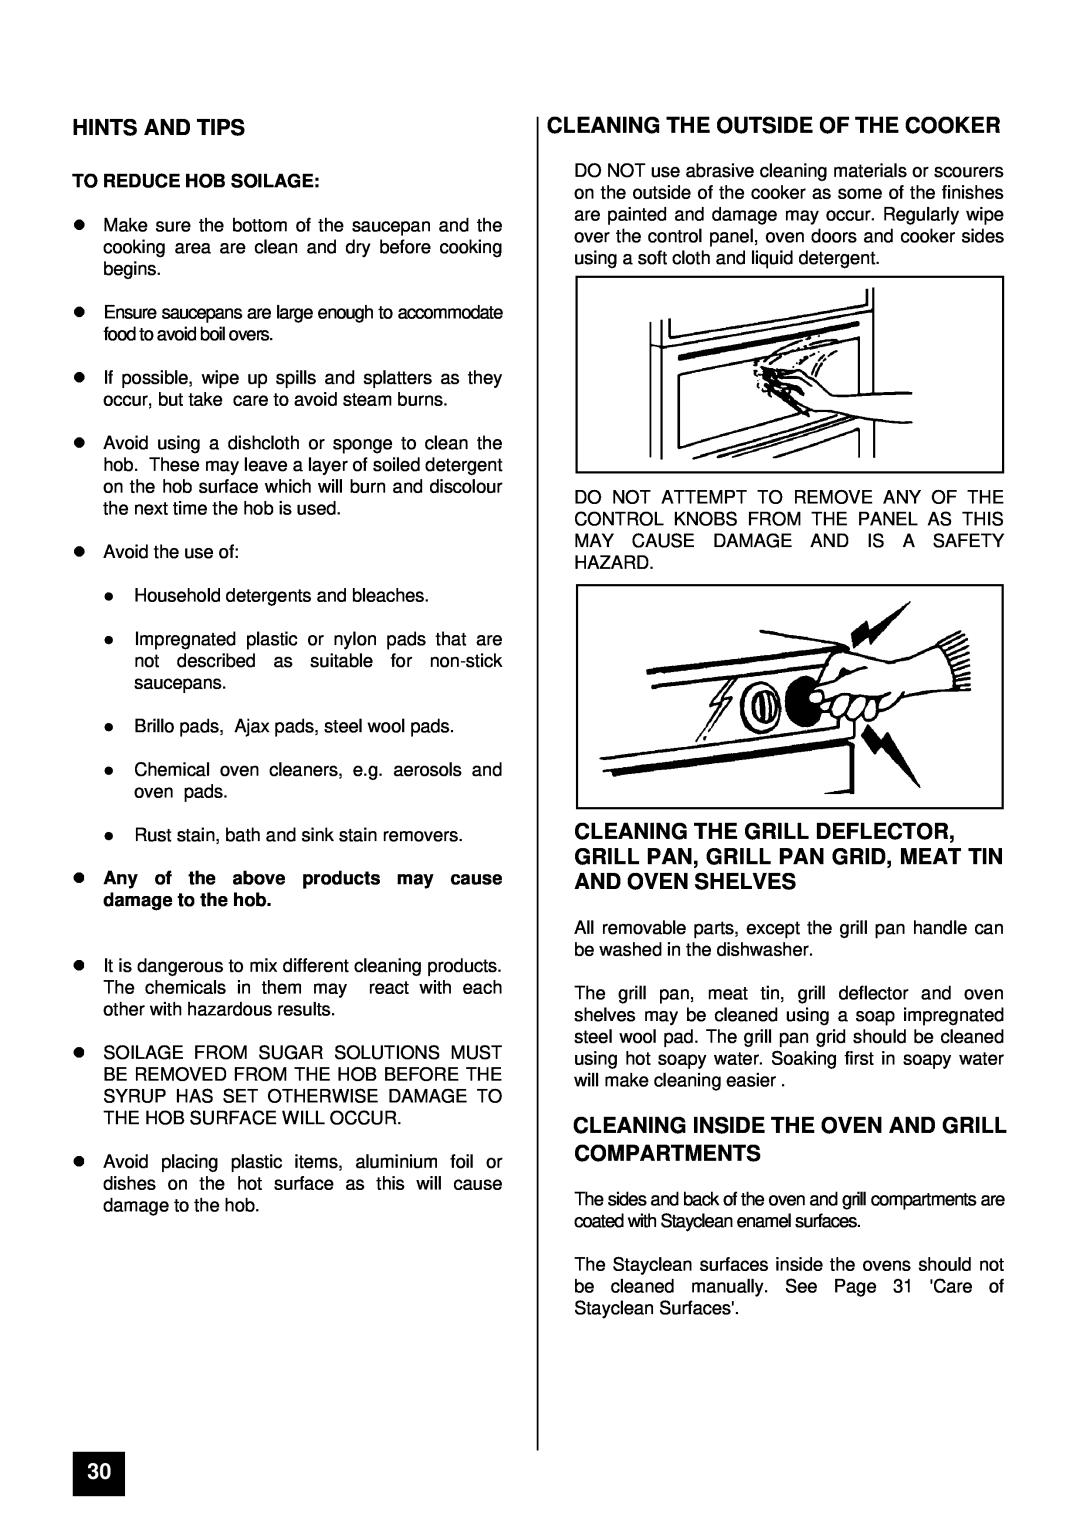 Zanussi ZCE 7800 manual Hints And Tips, Cleaning The Outside Of The Cooker, Cleaning Inside The Oven And Grill Compartments 